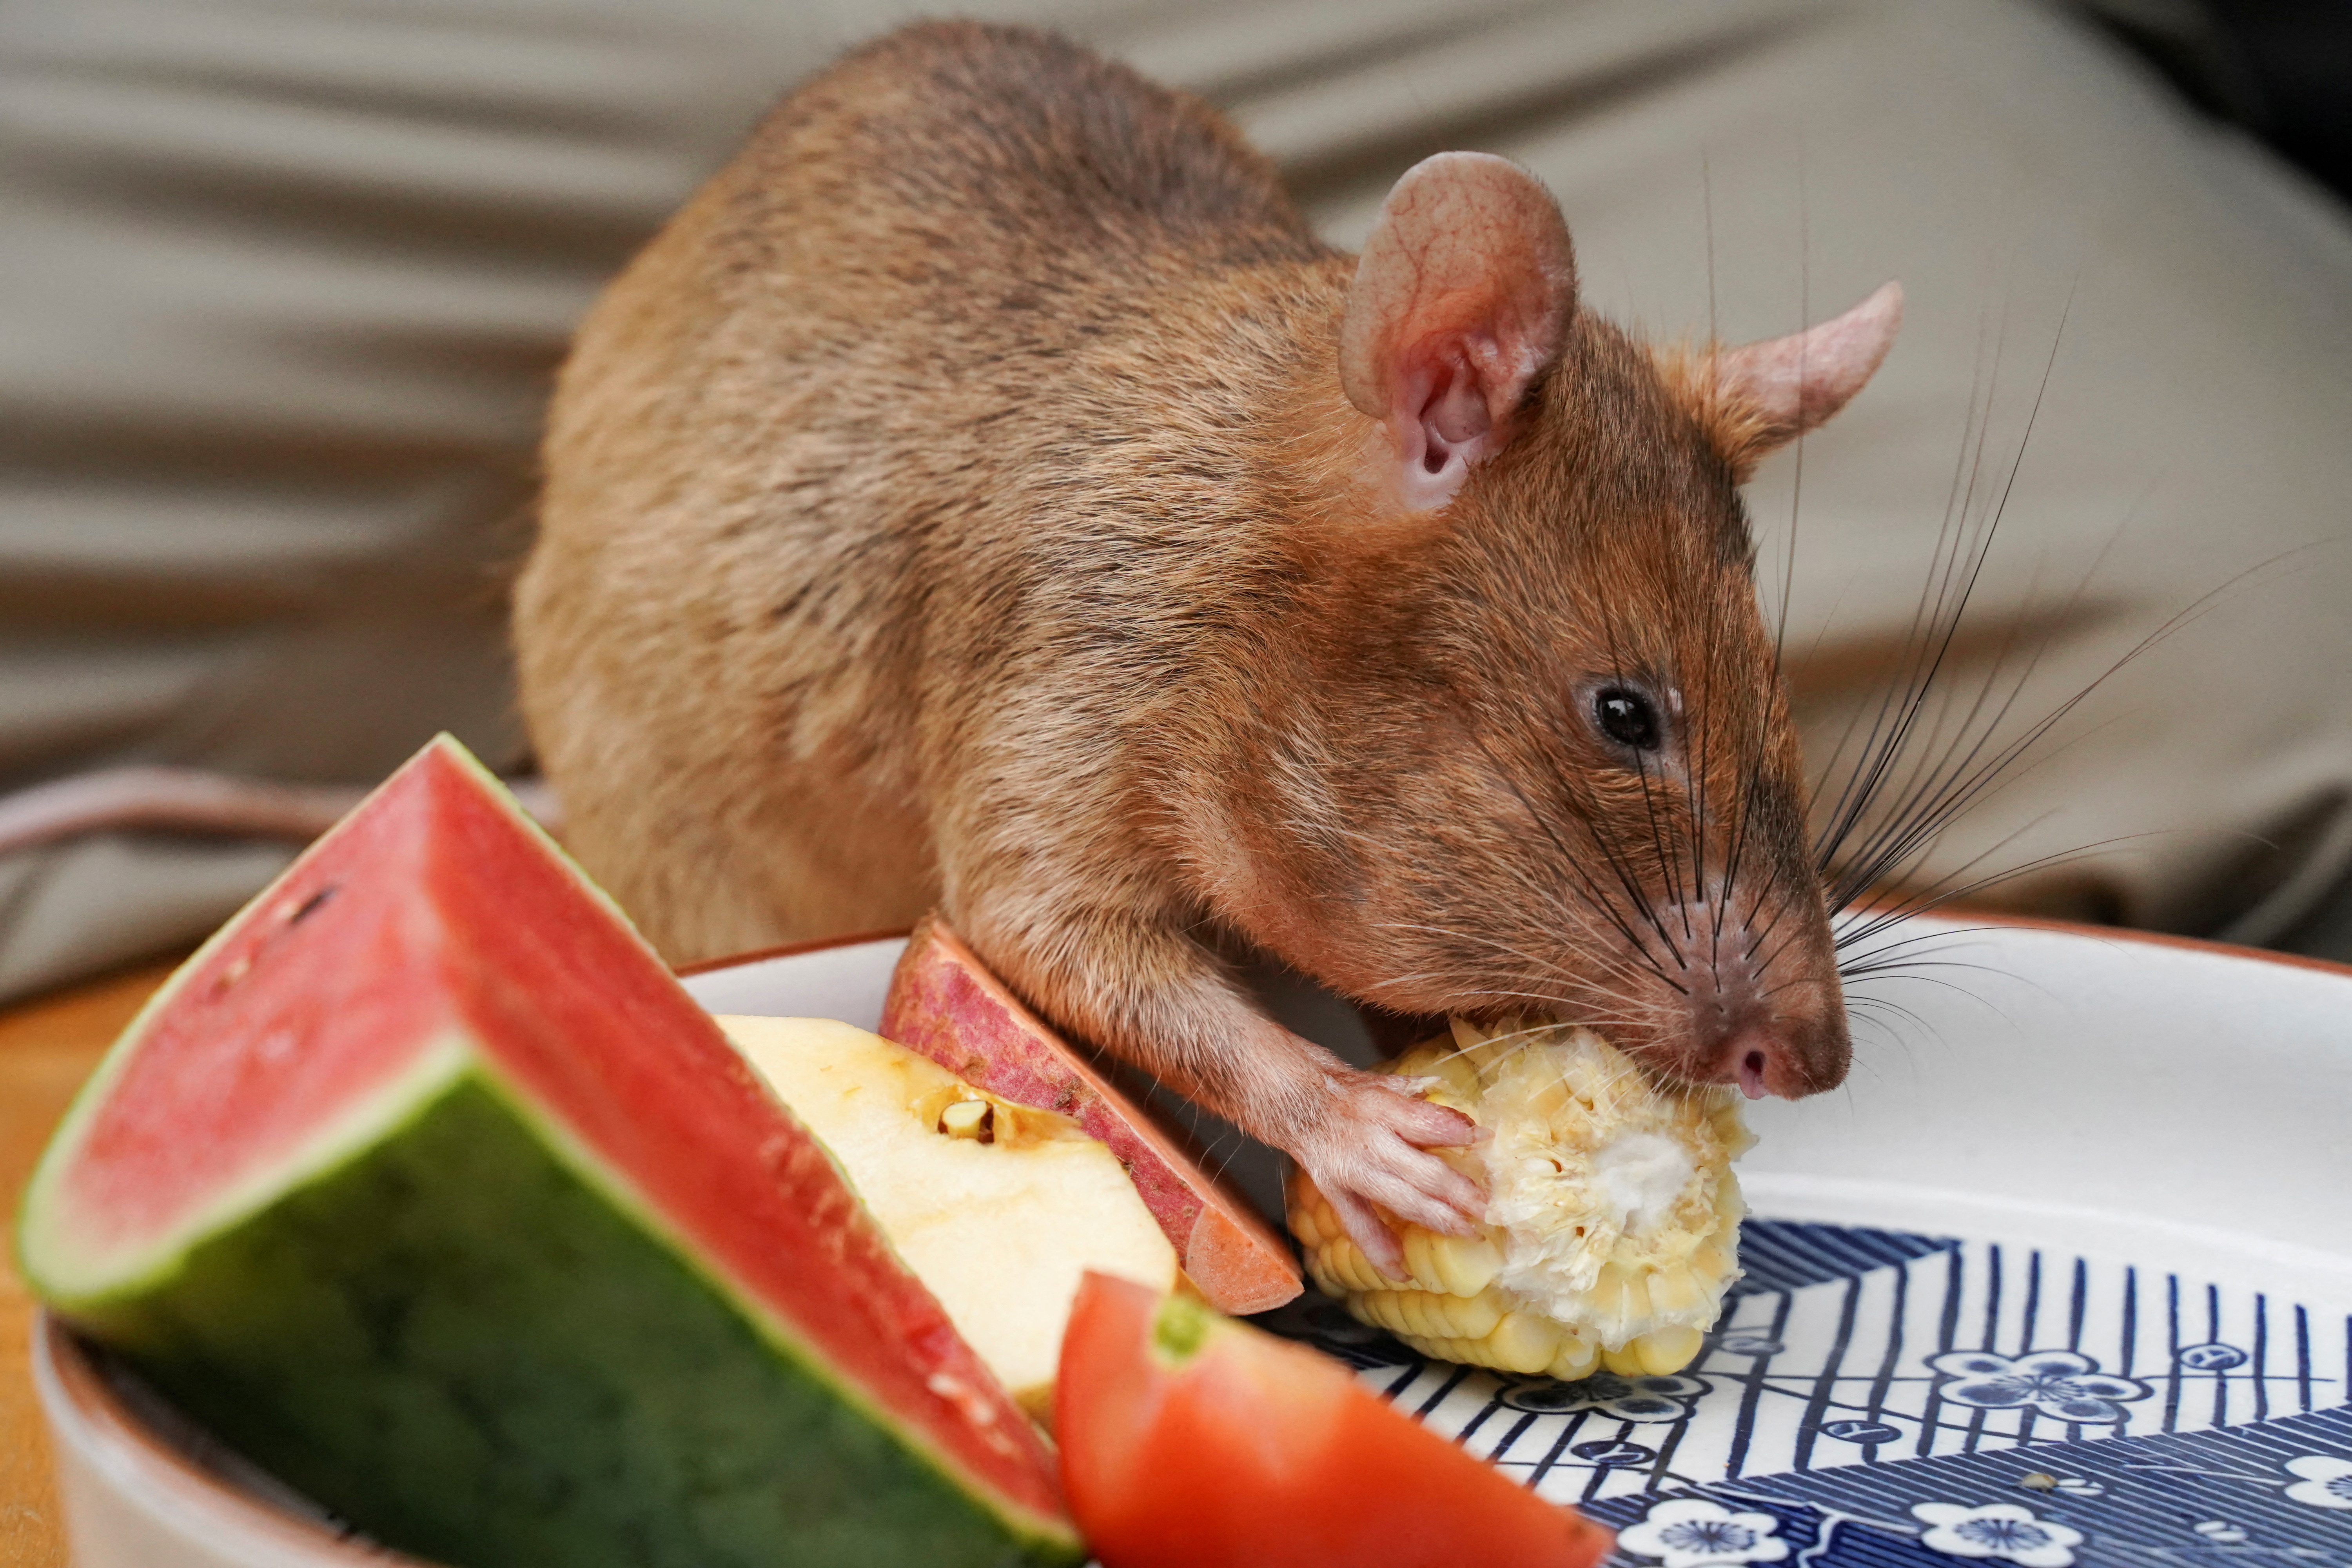 Magawa, the recently retired landmine detection rat, eats corn at the APOPO Visitor Center in Siem Reap, Cambodia, June 10, 2021. REUTERS/Cindy Liu